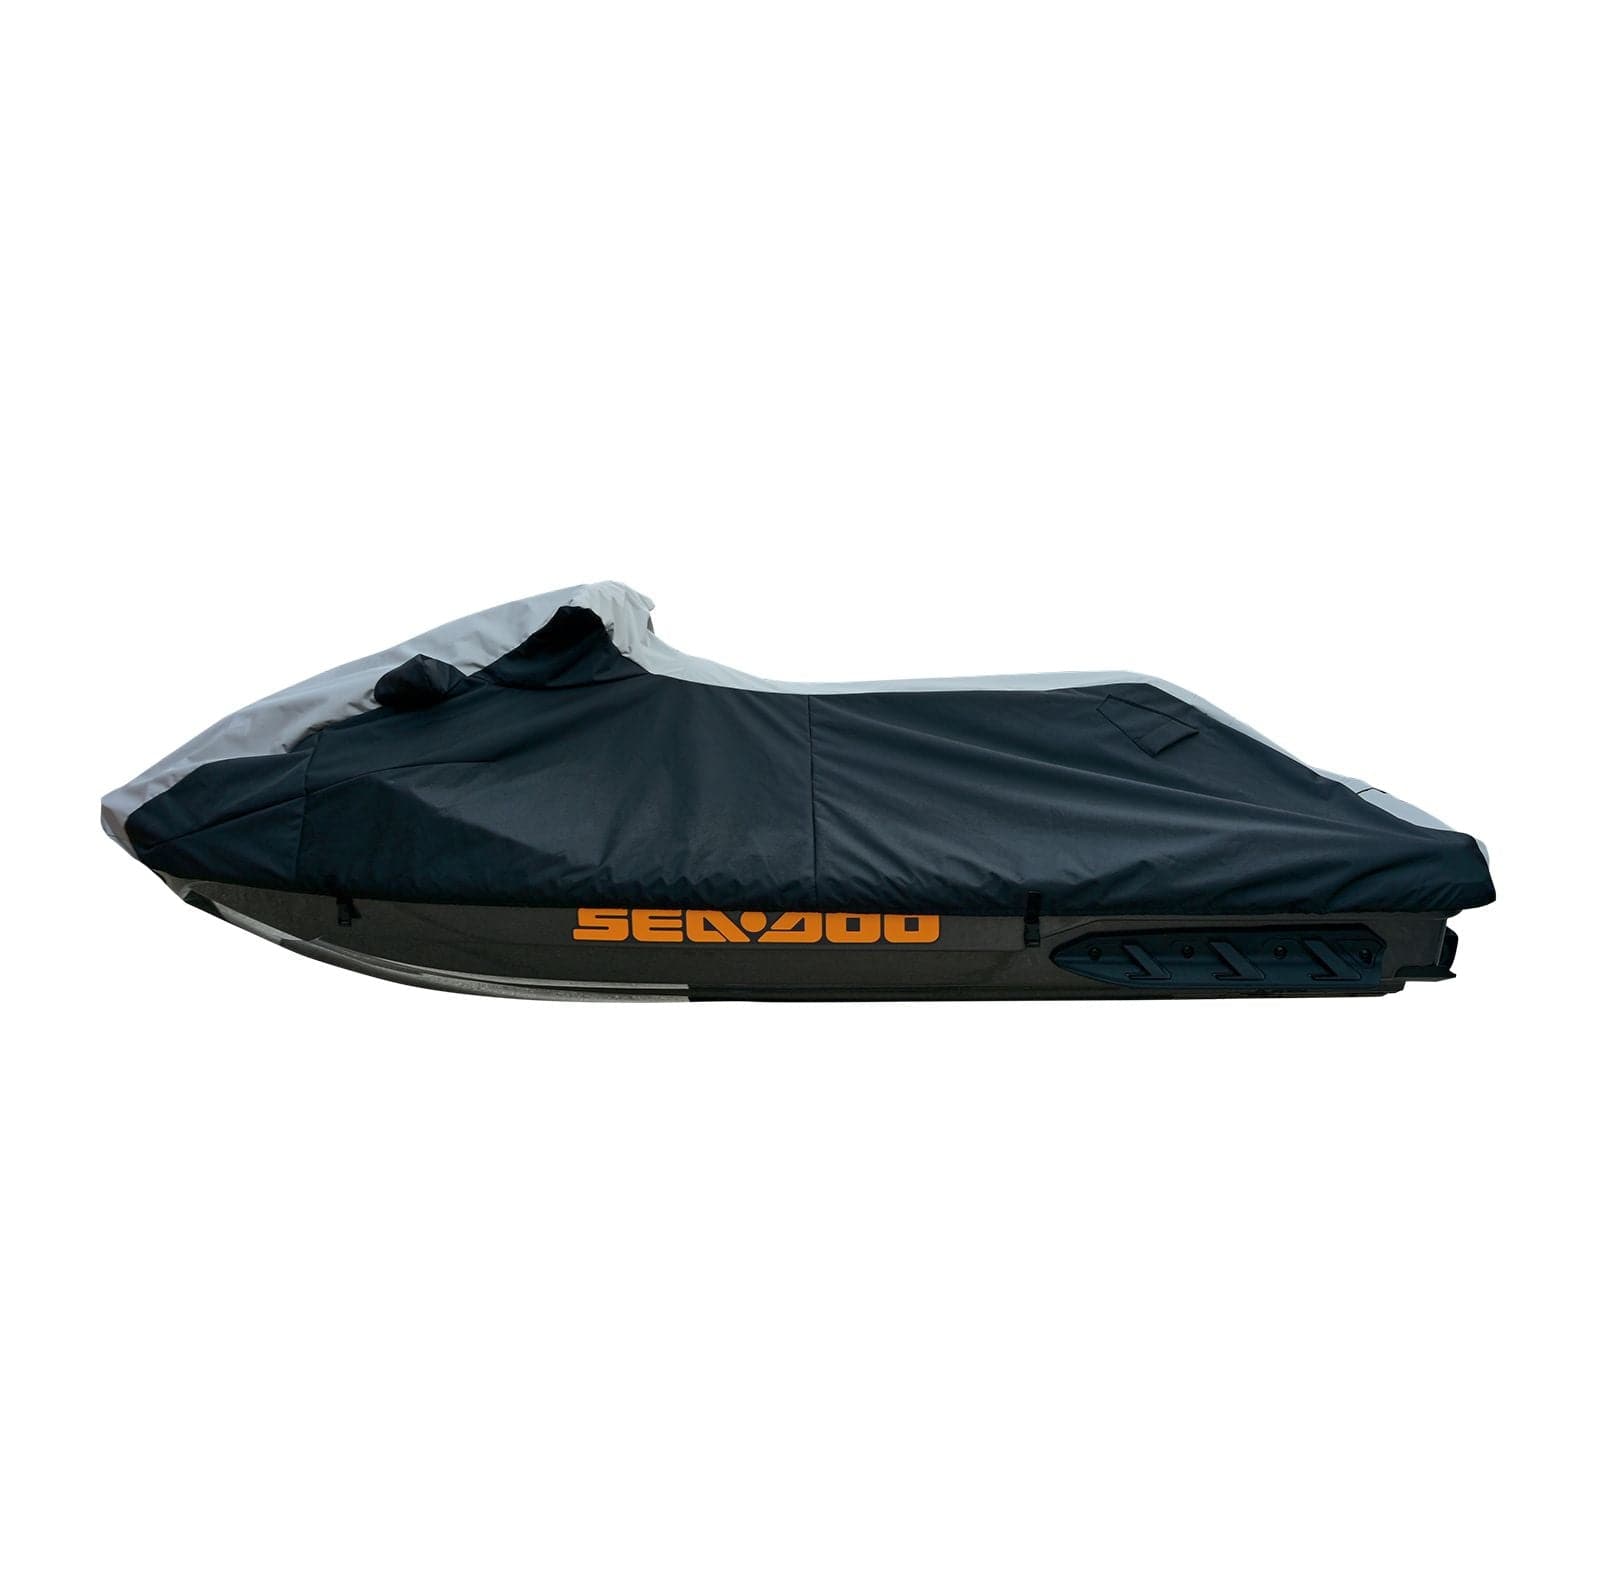 Trailerable Storage cover with vents for Kawasaki 1997-1999 1100 STX/1999-2000 900 STX